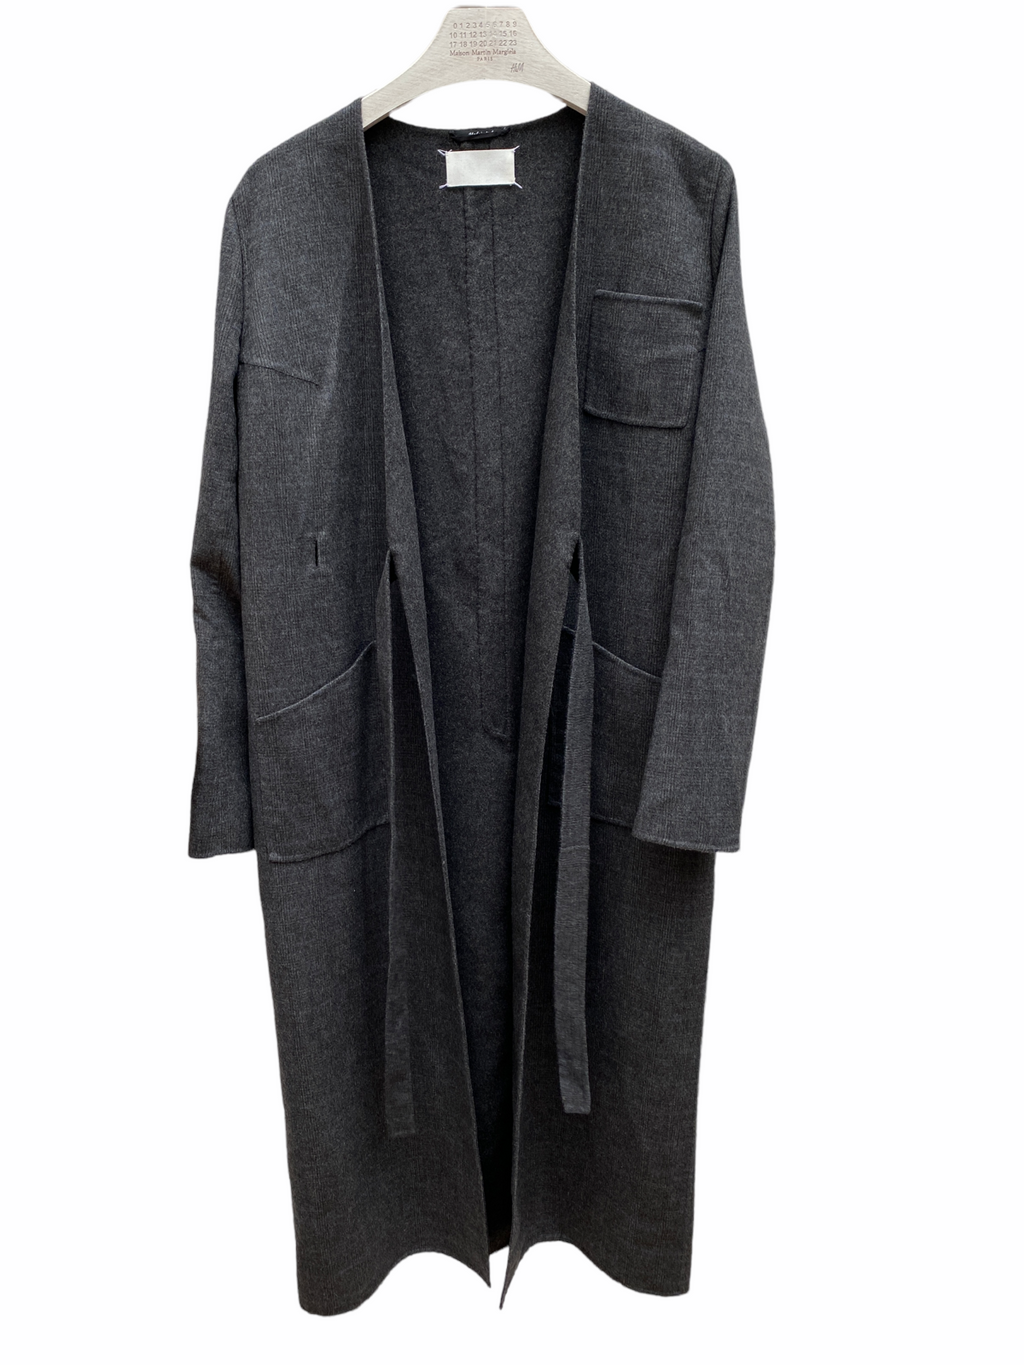 SS 2015 Grey Checkered Cashmere Lab Coat